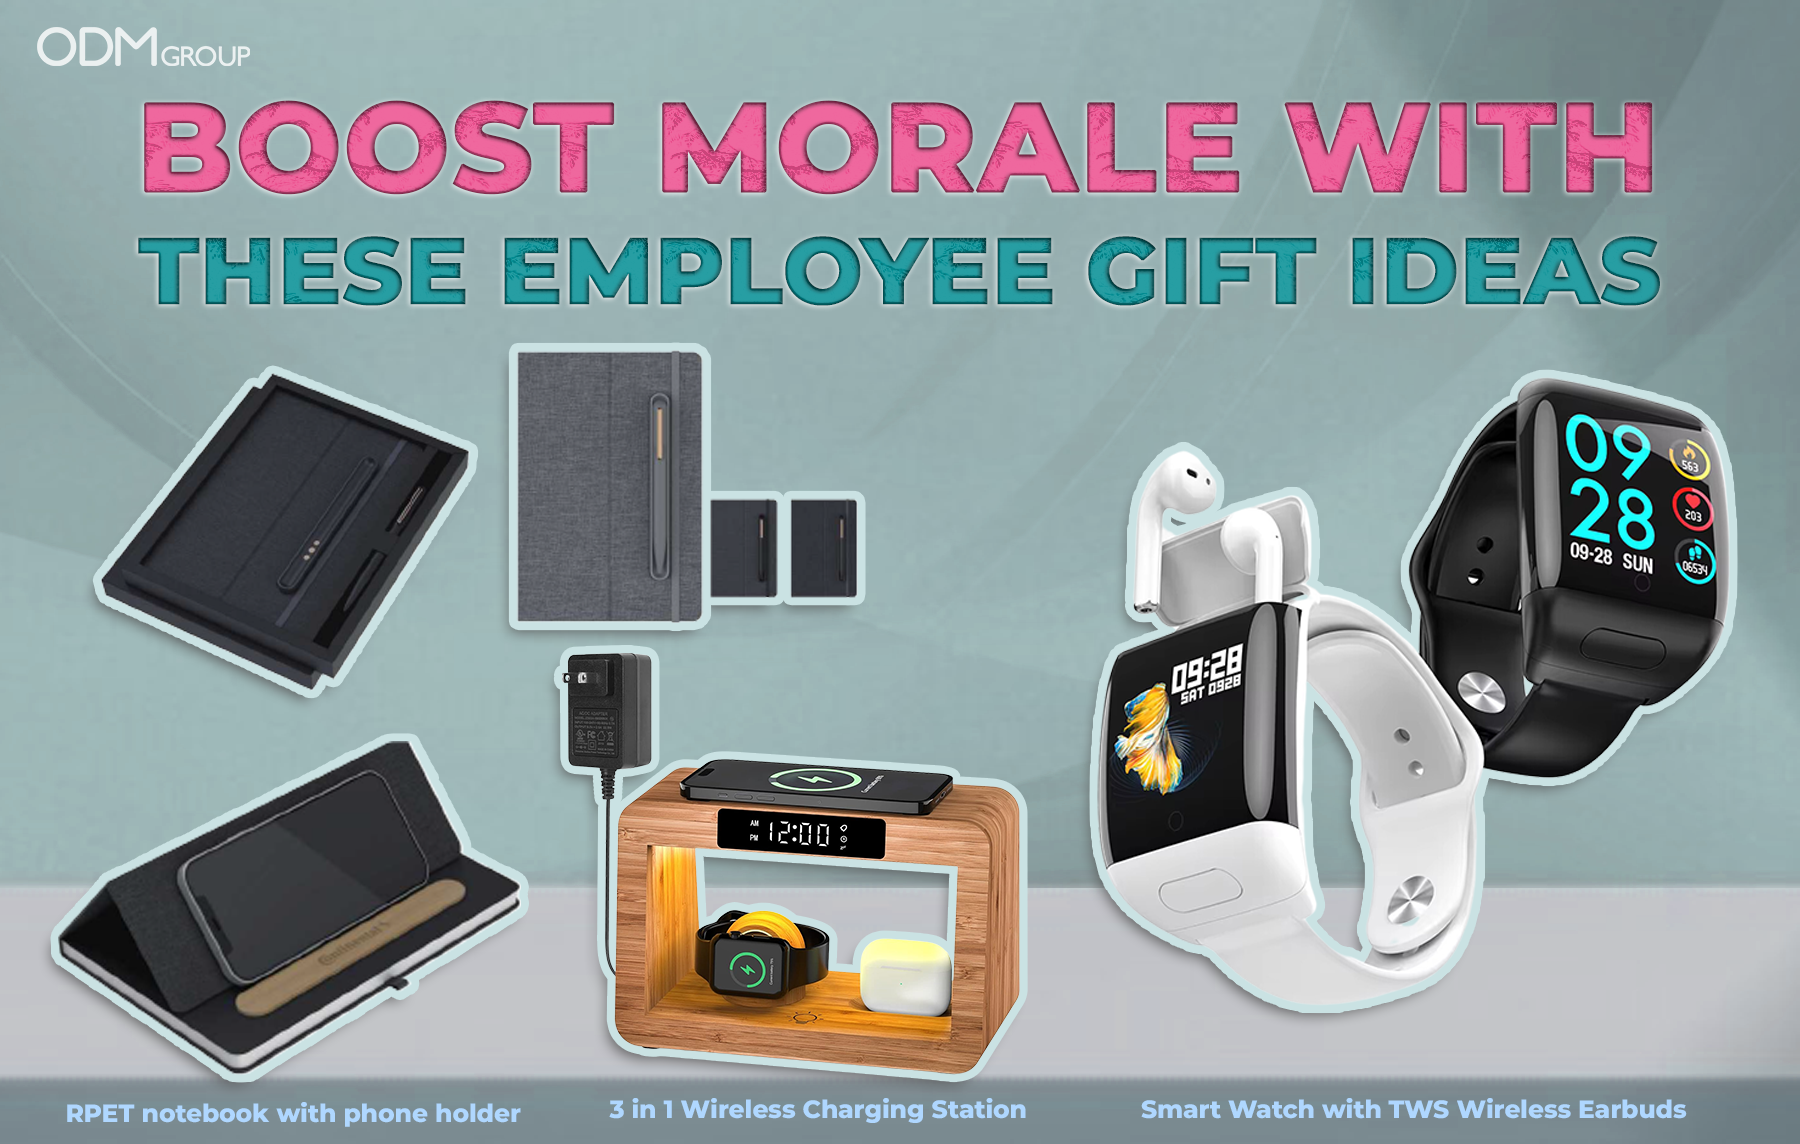 "Boost Morale with These Employee Gift Ideas - featured products include RPET notebook with phone holder, 3 in 1 wireless charging station, and smart watch with TWS wireless earbuds.